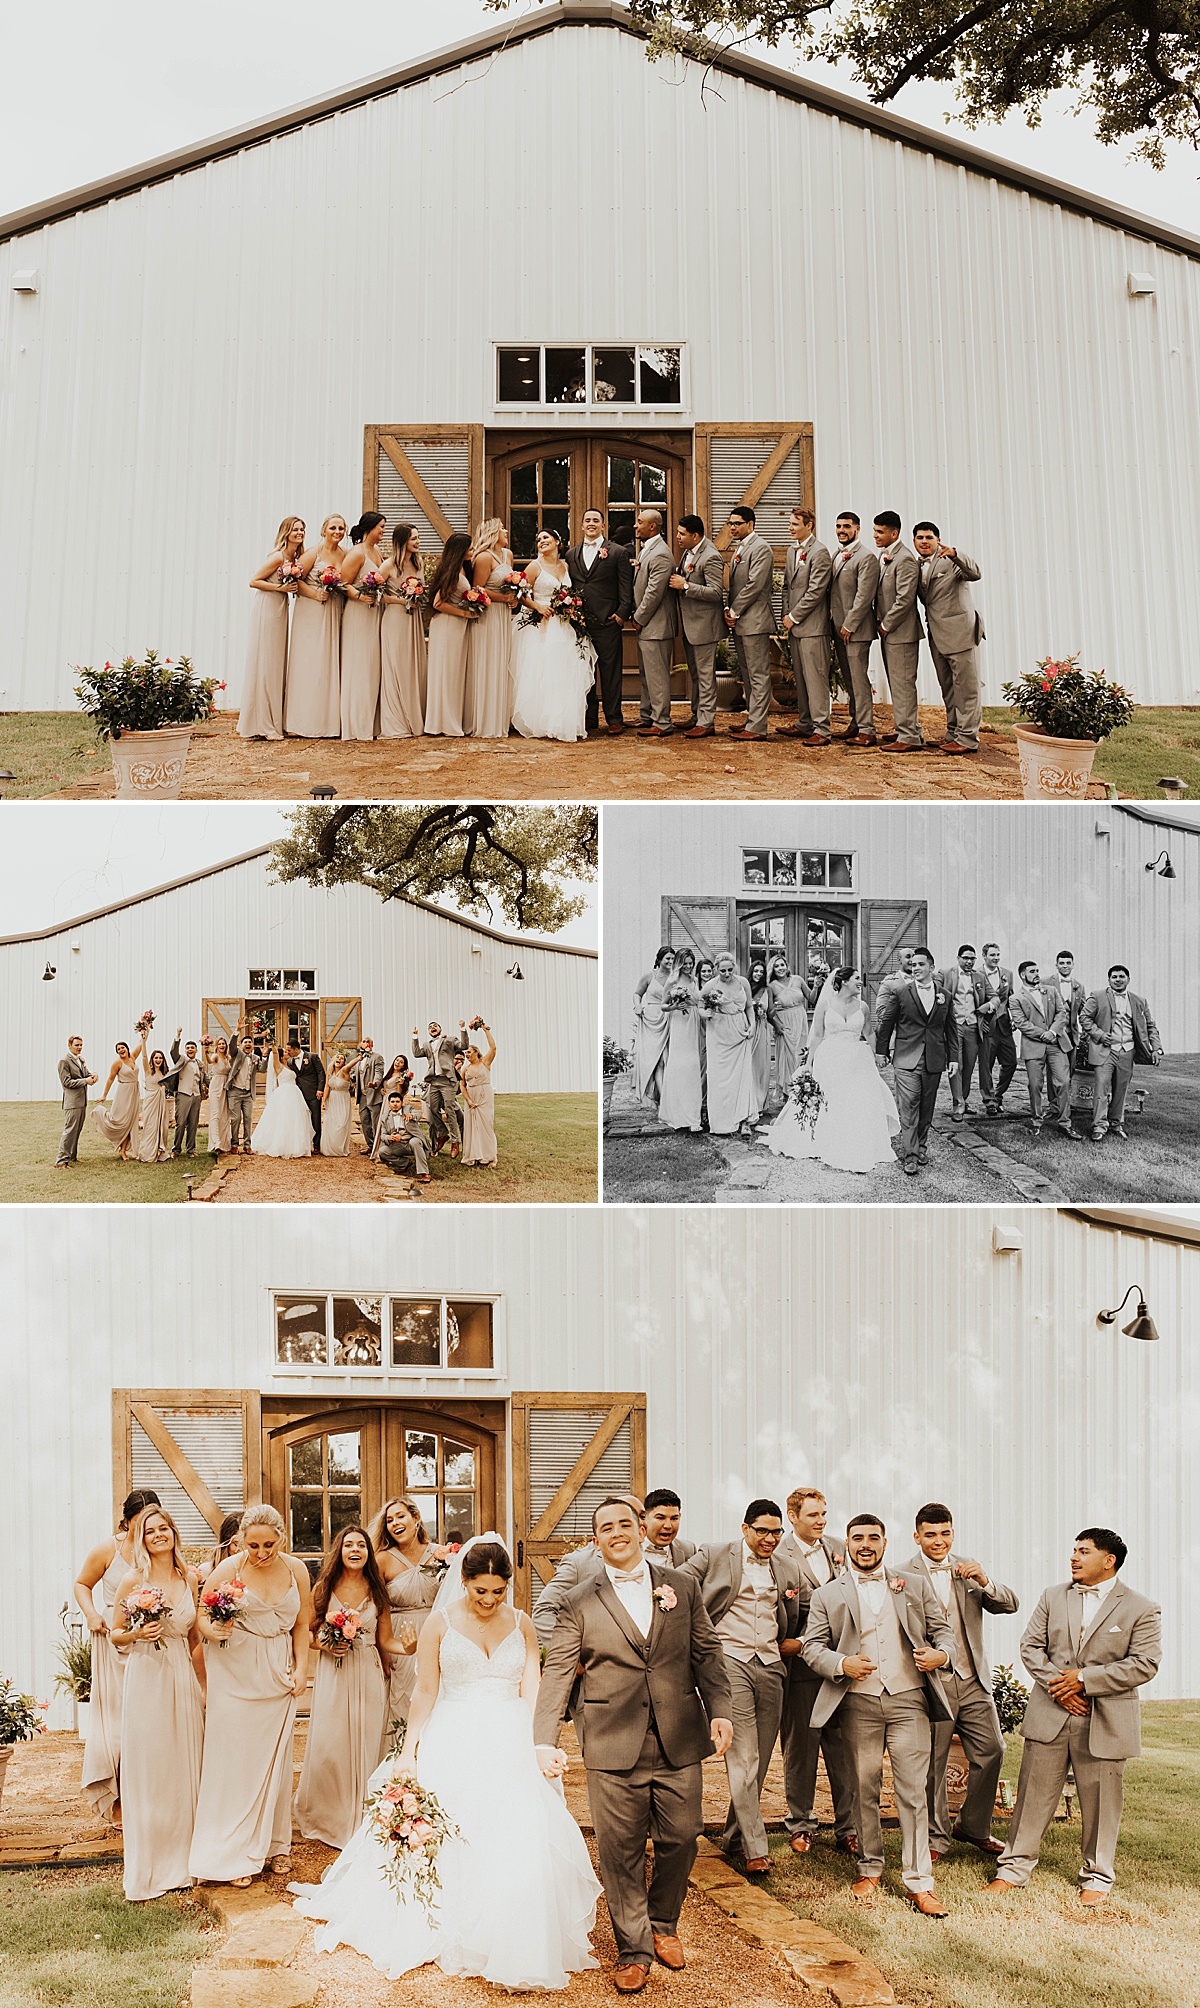 A bridal party photo at their wedding at Red Bird Fields in Austin, TX.